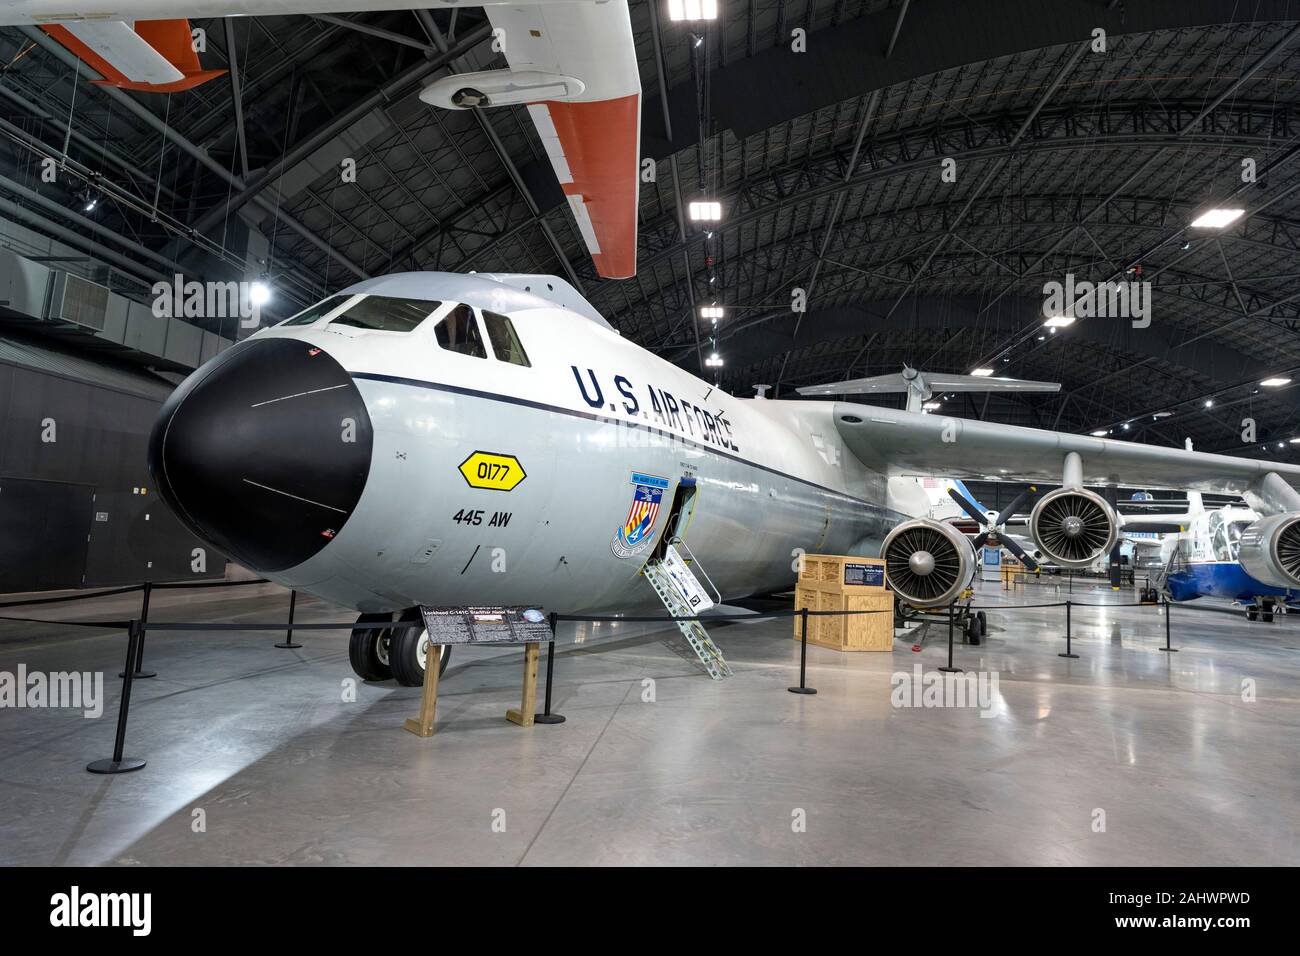 Lockheed C-141C Starlifter 'Hanoi Taxii', National Museum of the United States Air Force (anciennement l'United States Air Force Museum), Dayton, Ohio, USA. Banque D'Images